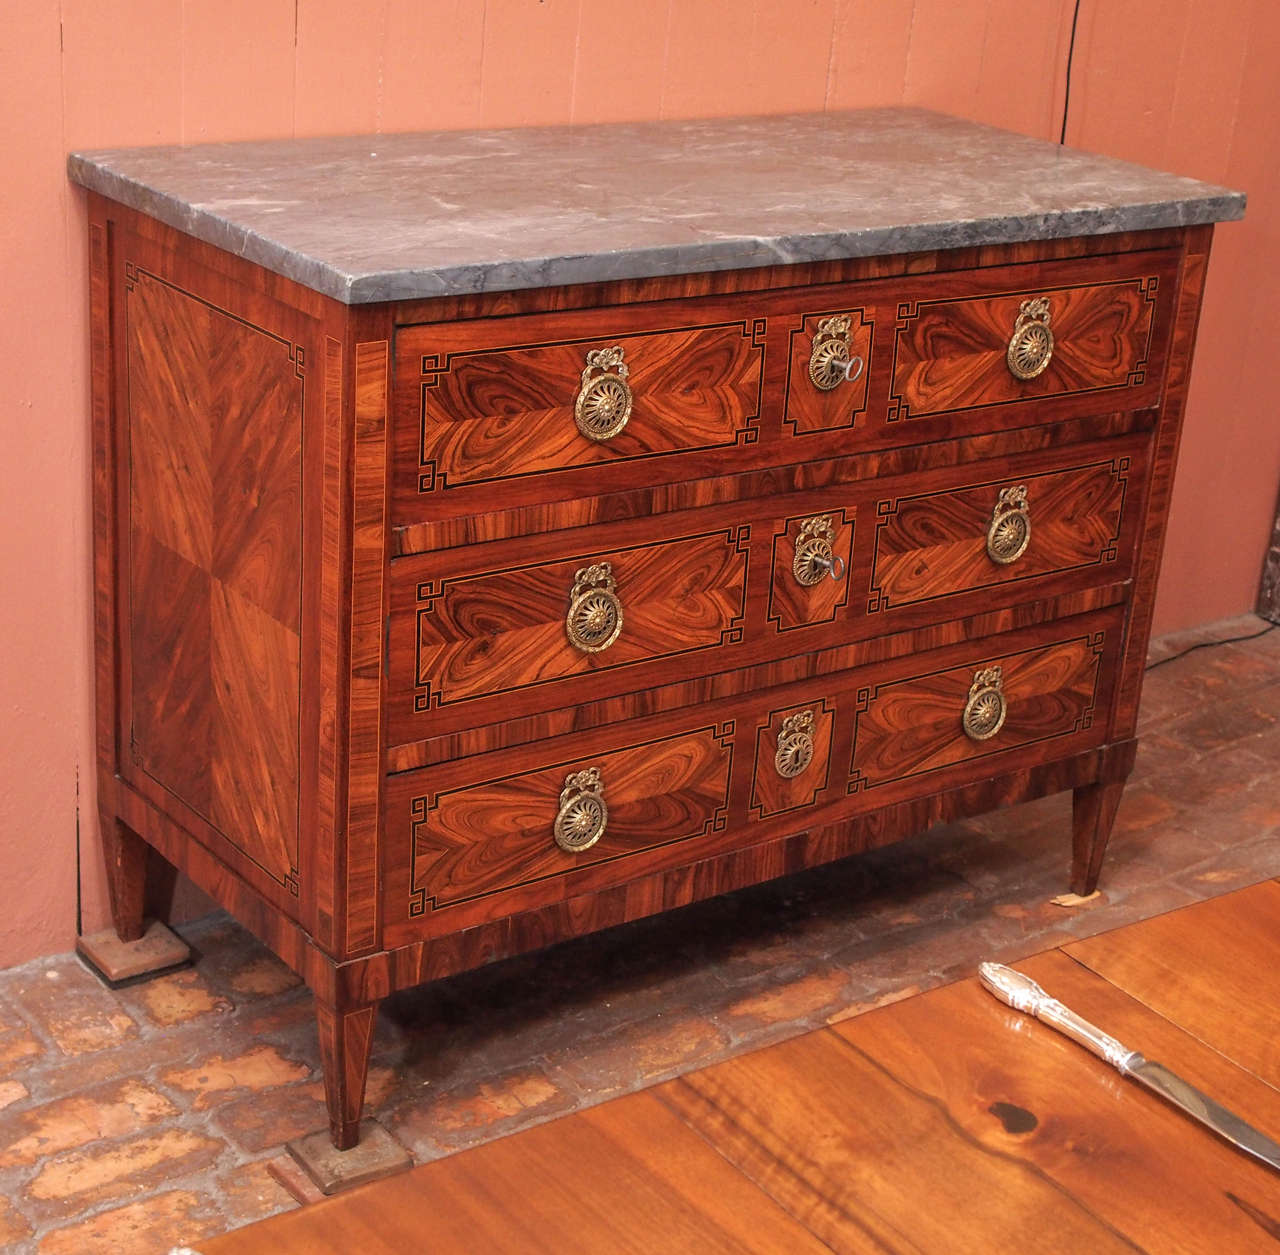 Fine French Louis XVI/Directoire transition mahogany marquetry commode with grey marble top, circa 1790.